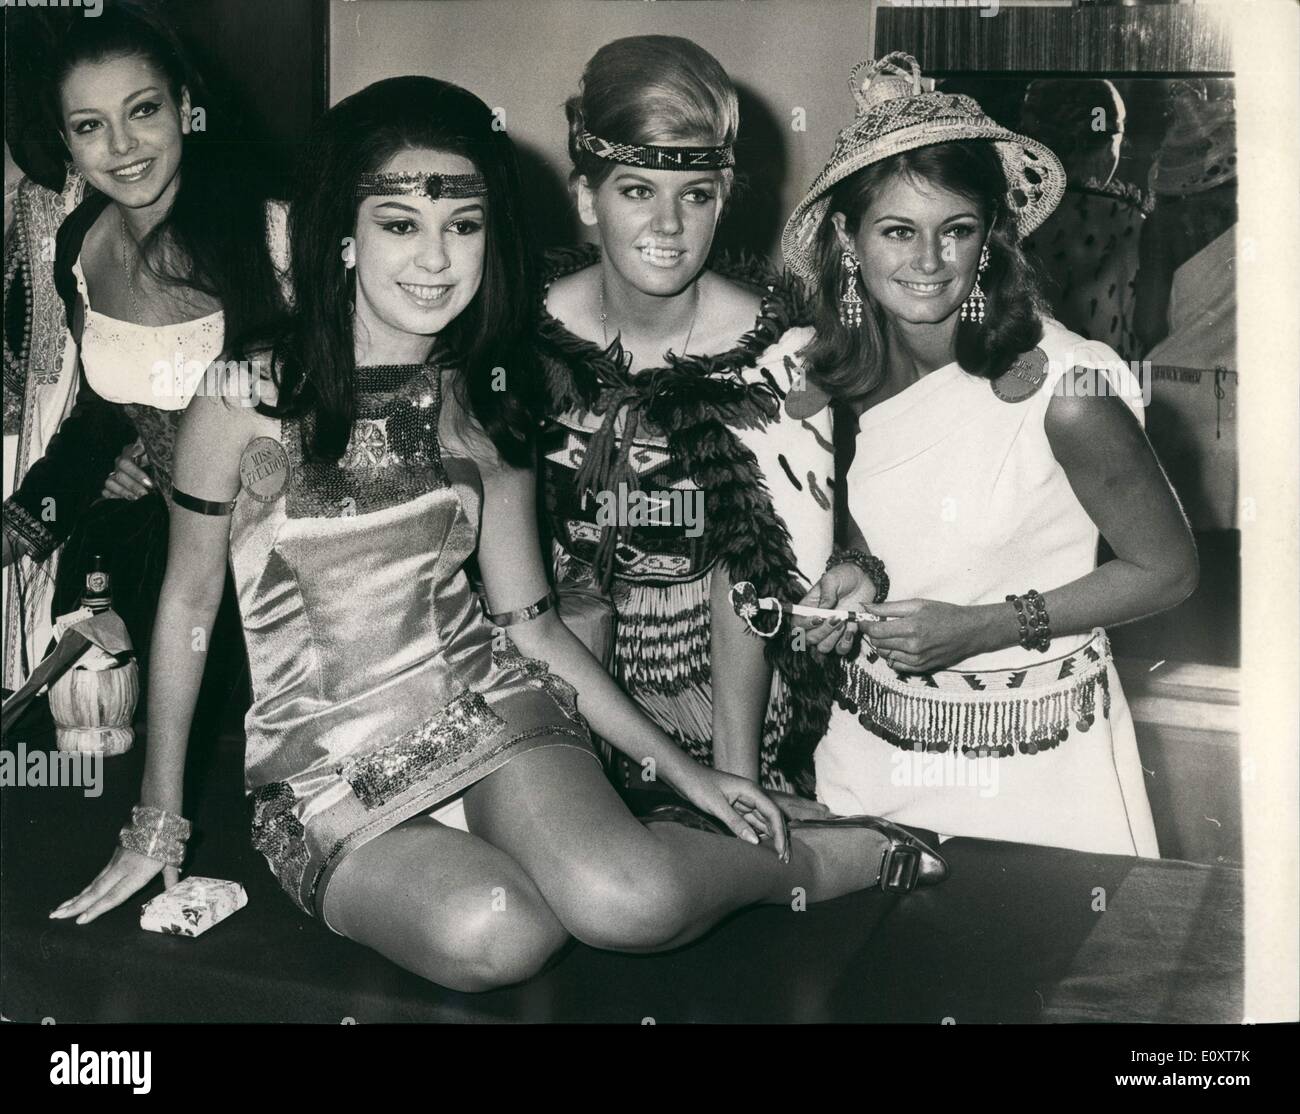 Nov. 11, 1967 - International Beauty Queens Attend The Variety Club's Luncheon At The Savoy Hotel: The international beauty queens who are competing in the ''Miss World'' contest, today attended a luncheon given by the Variety Club of Great Britain at the Savoy Hotel. Each of the girls brought gifts from their own countries to be used to raise funds for the sick and needy children. Photo shows Mini-skirted ''Miss Ecuador'' (Laura Baquero) seated on the table with ''Miss South Africa'' (Disa Duivestein) on right,, at the luncheon today. Stock Photo